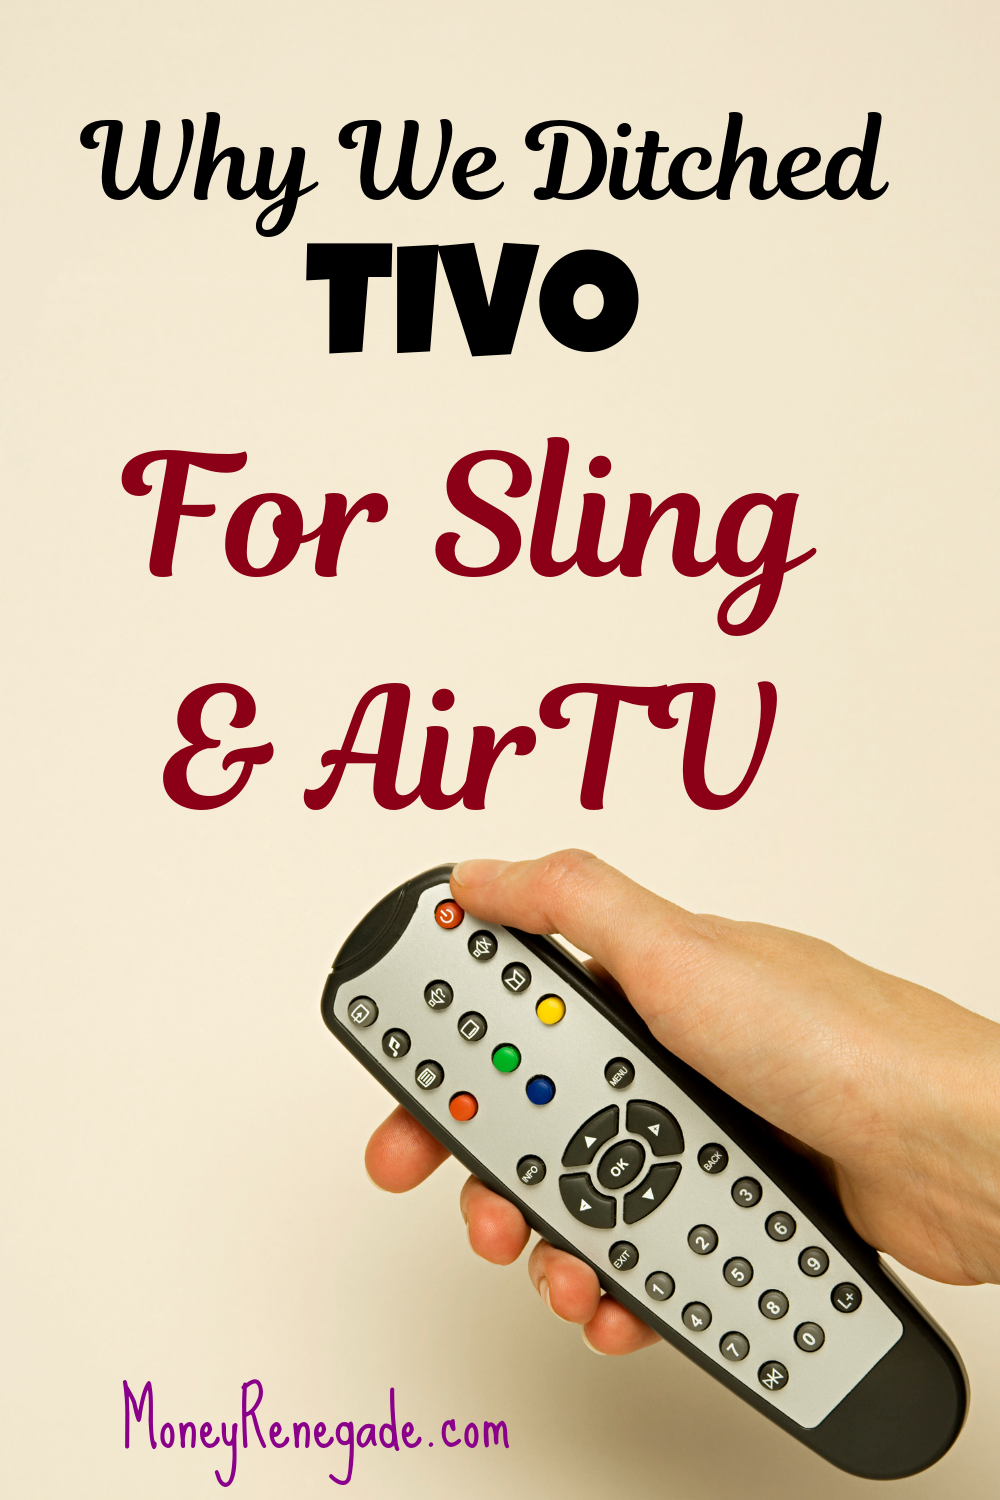 Ditched Tivo for Sling & AirTv